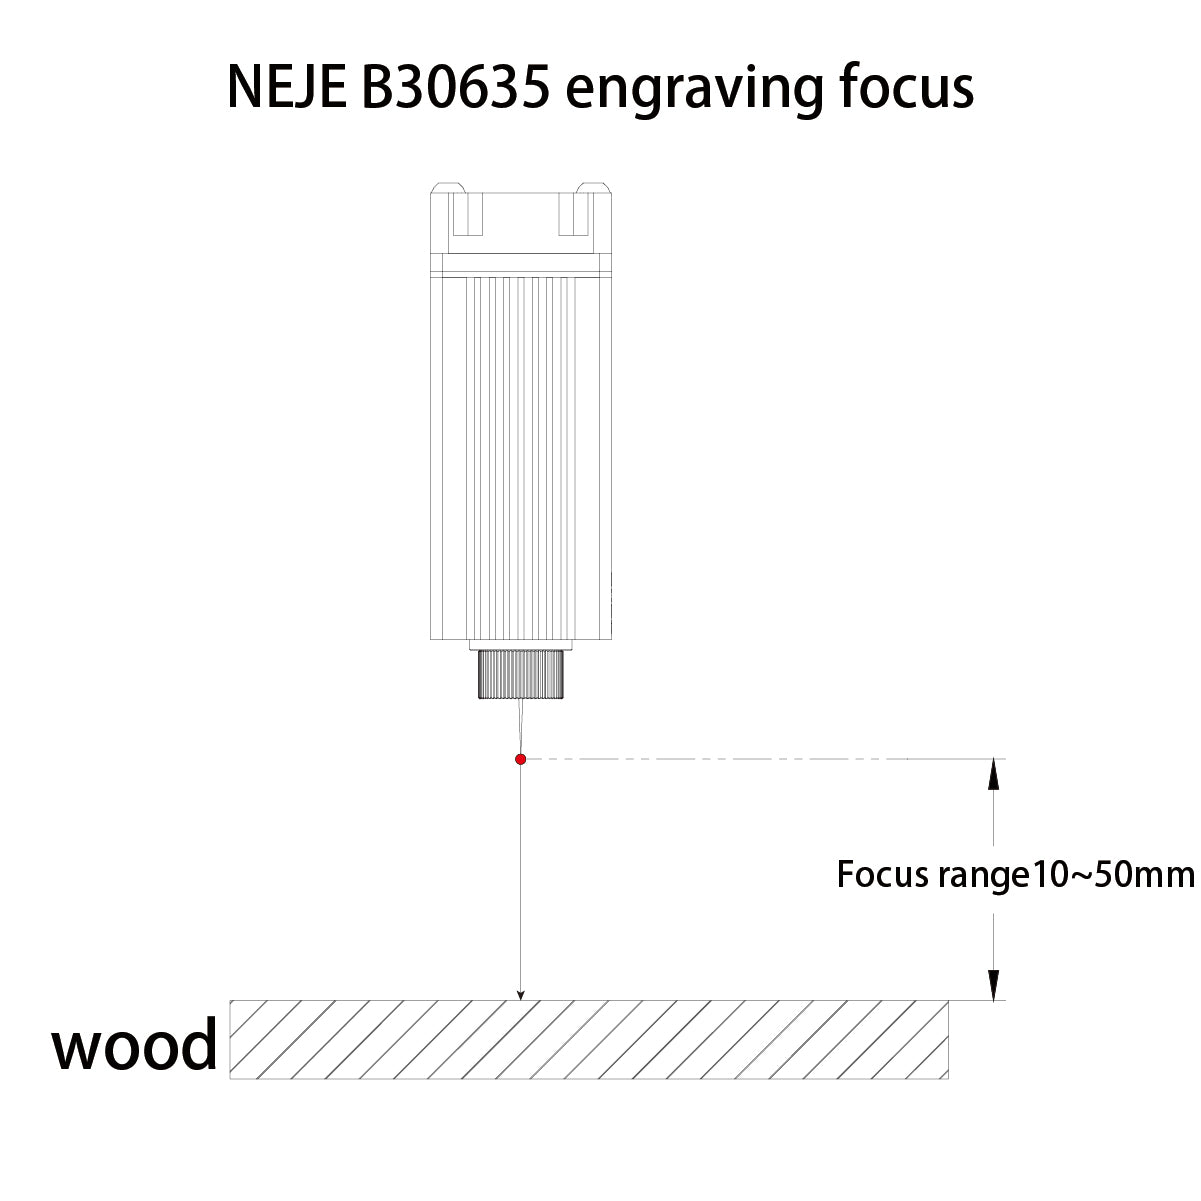 405nm 600mw 12V Laser Module for Grayscale Engraving, NEJE B30635 (3500MW updated model)